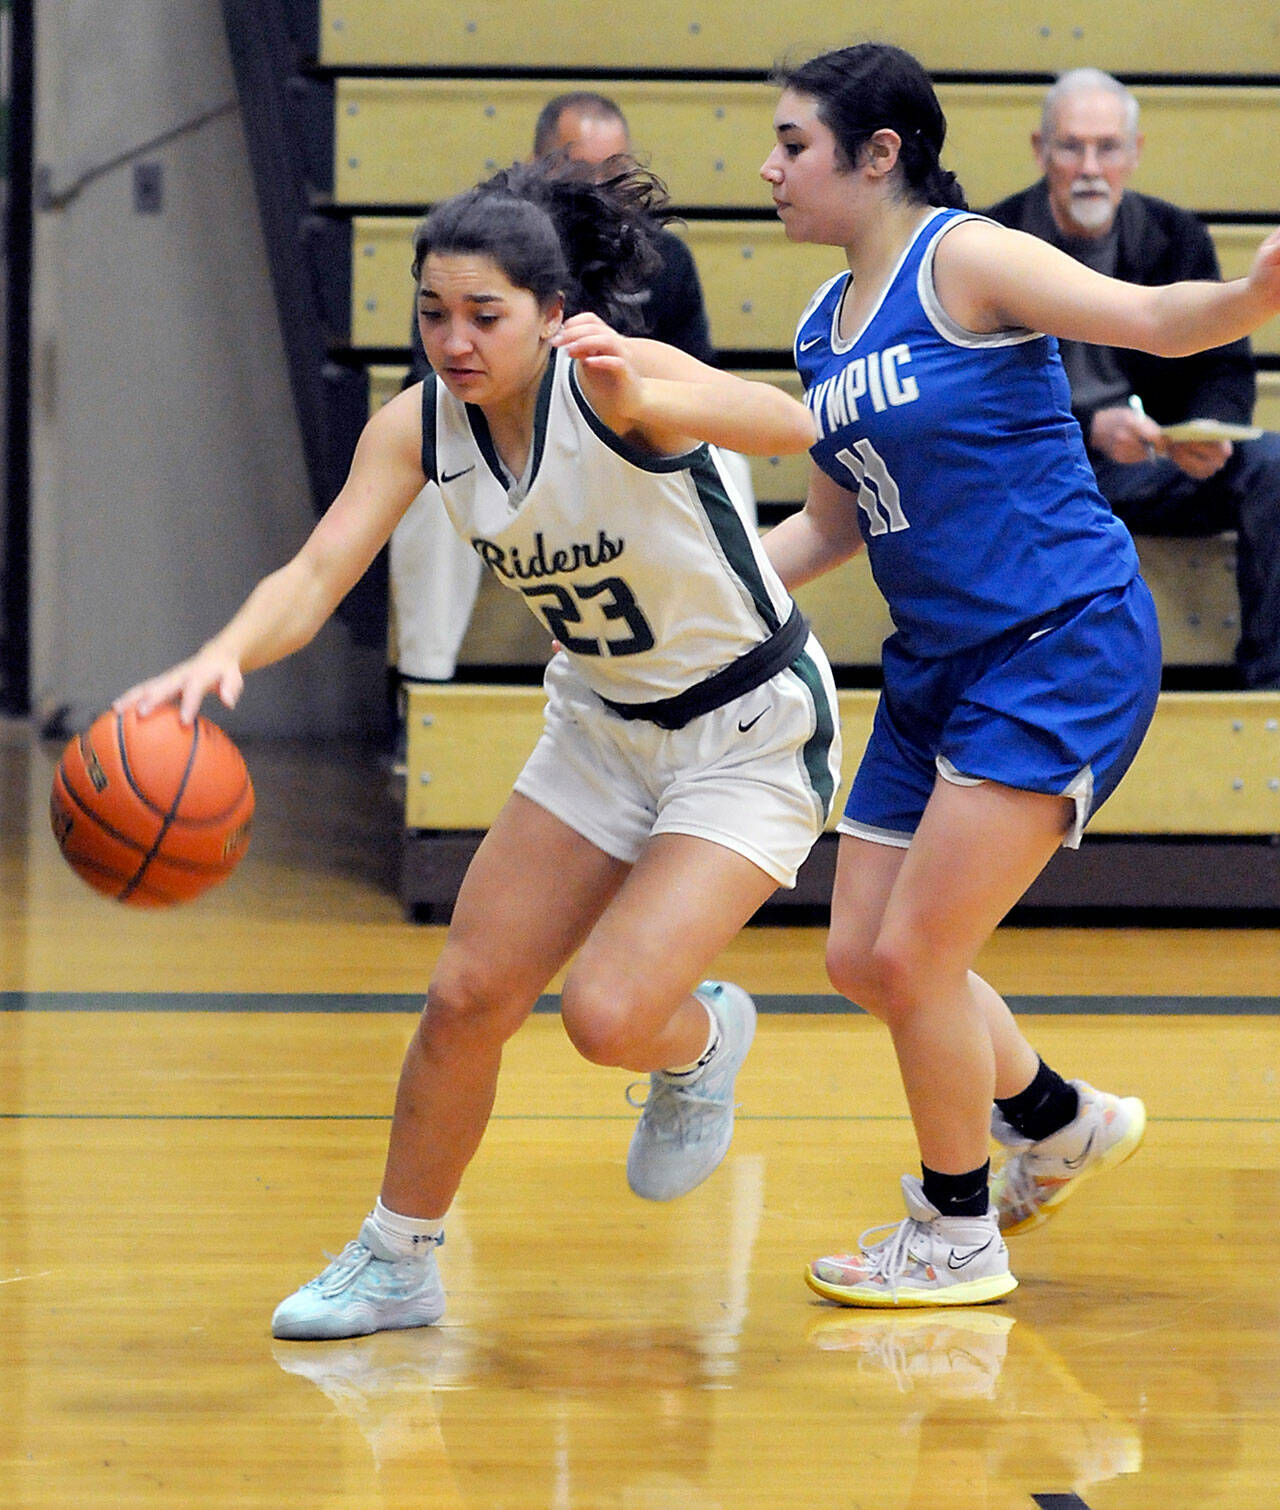 KEITH THORPE/PENINSULA DAILY NEWS Piper Williams of Port Angeles dribbles in on the baseline as Olympic’s Angelina Godinez-Gonzalez guards the approach on Thursday night at Port Angeles High School.